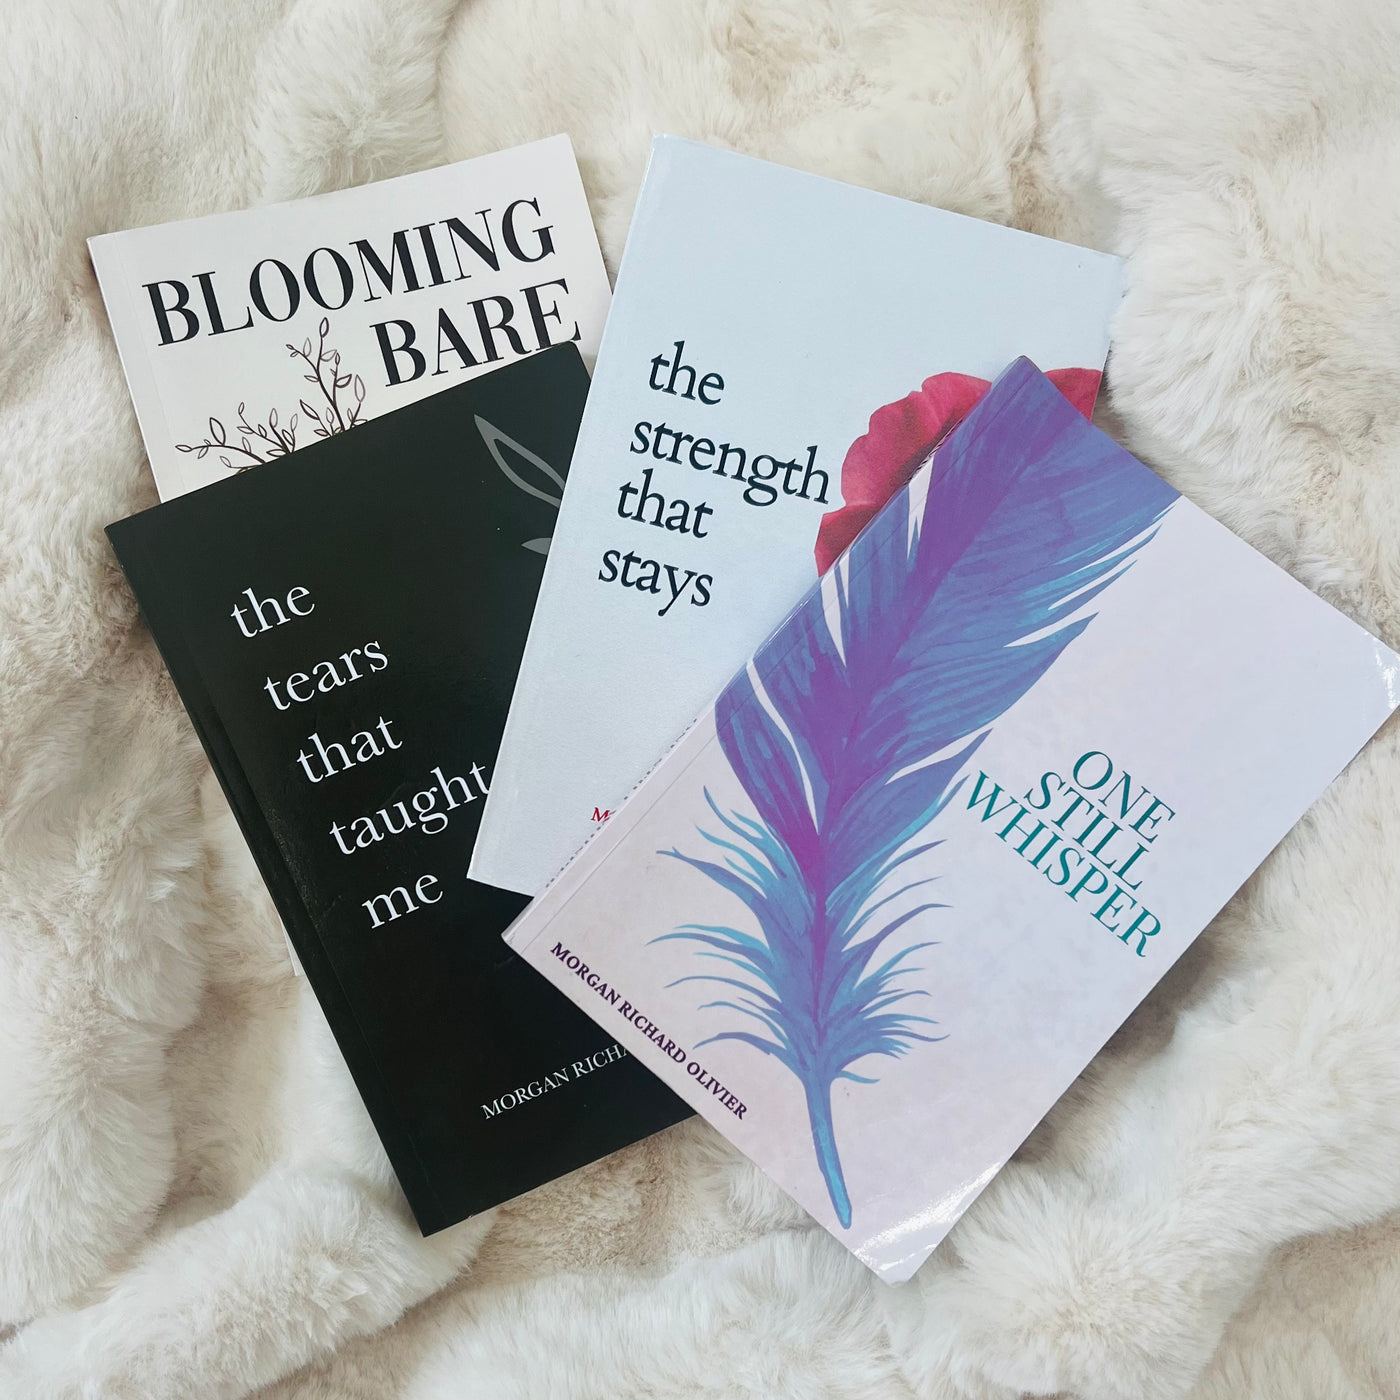 Morgan's Full Poetry & Prose Collection